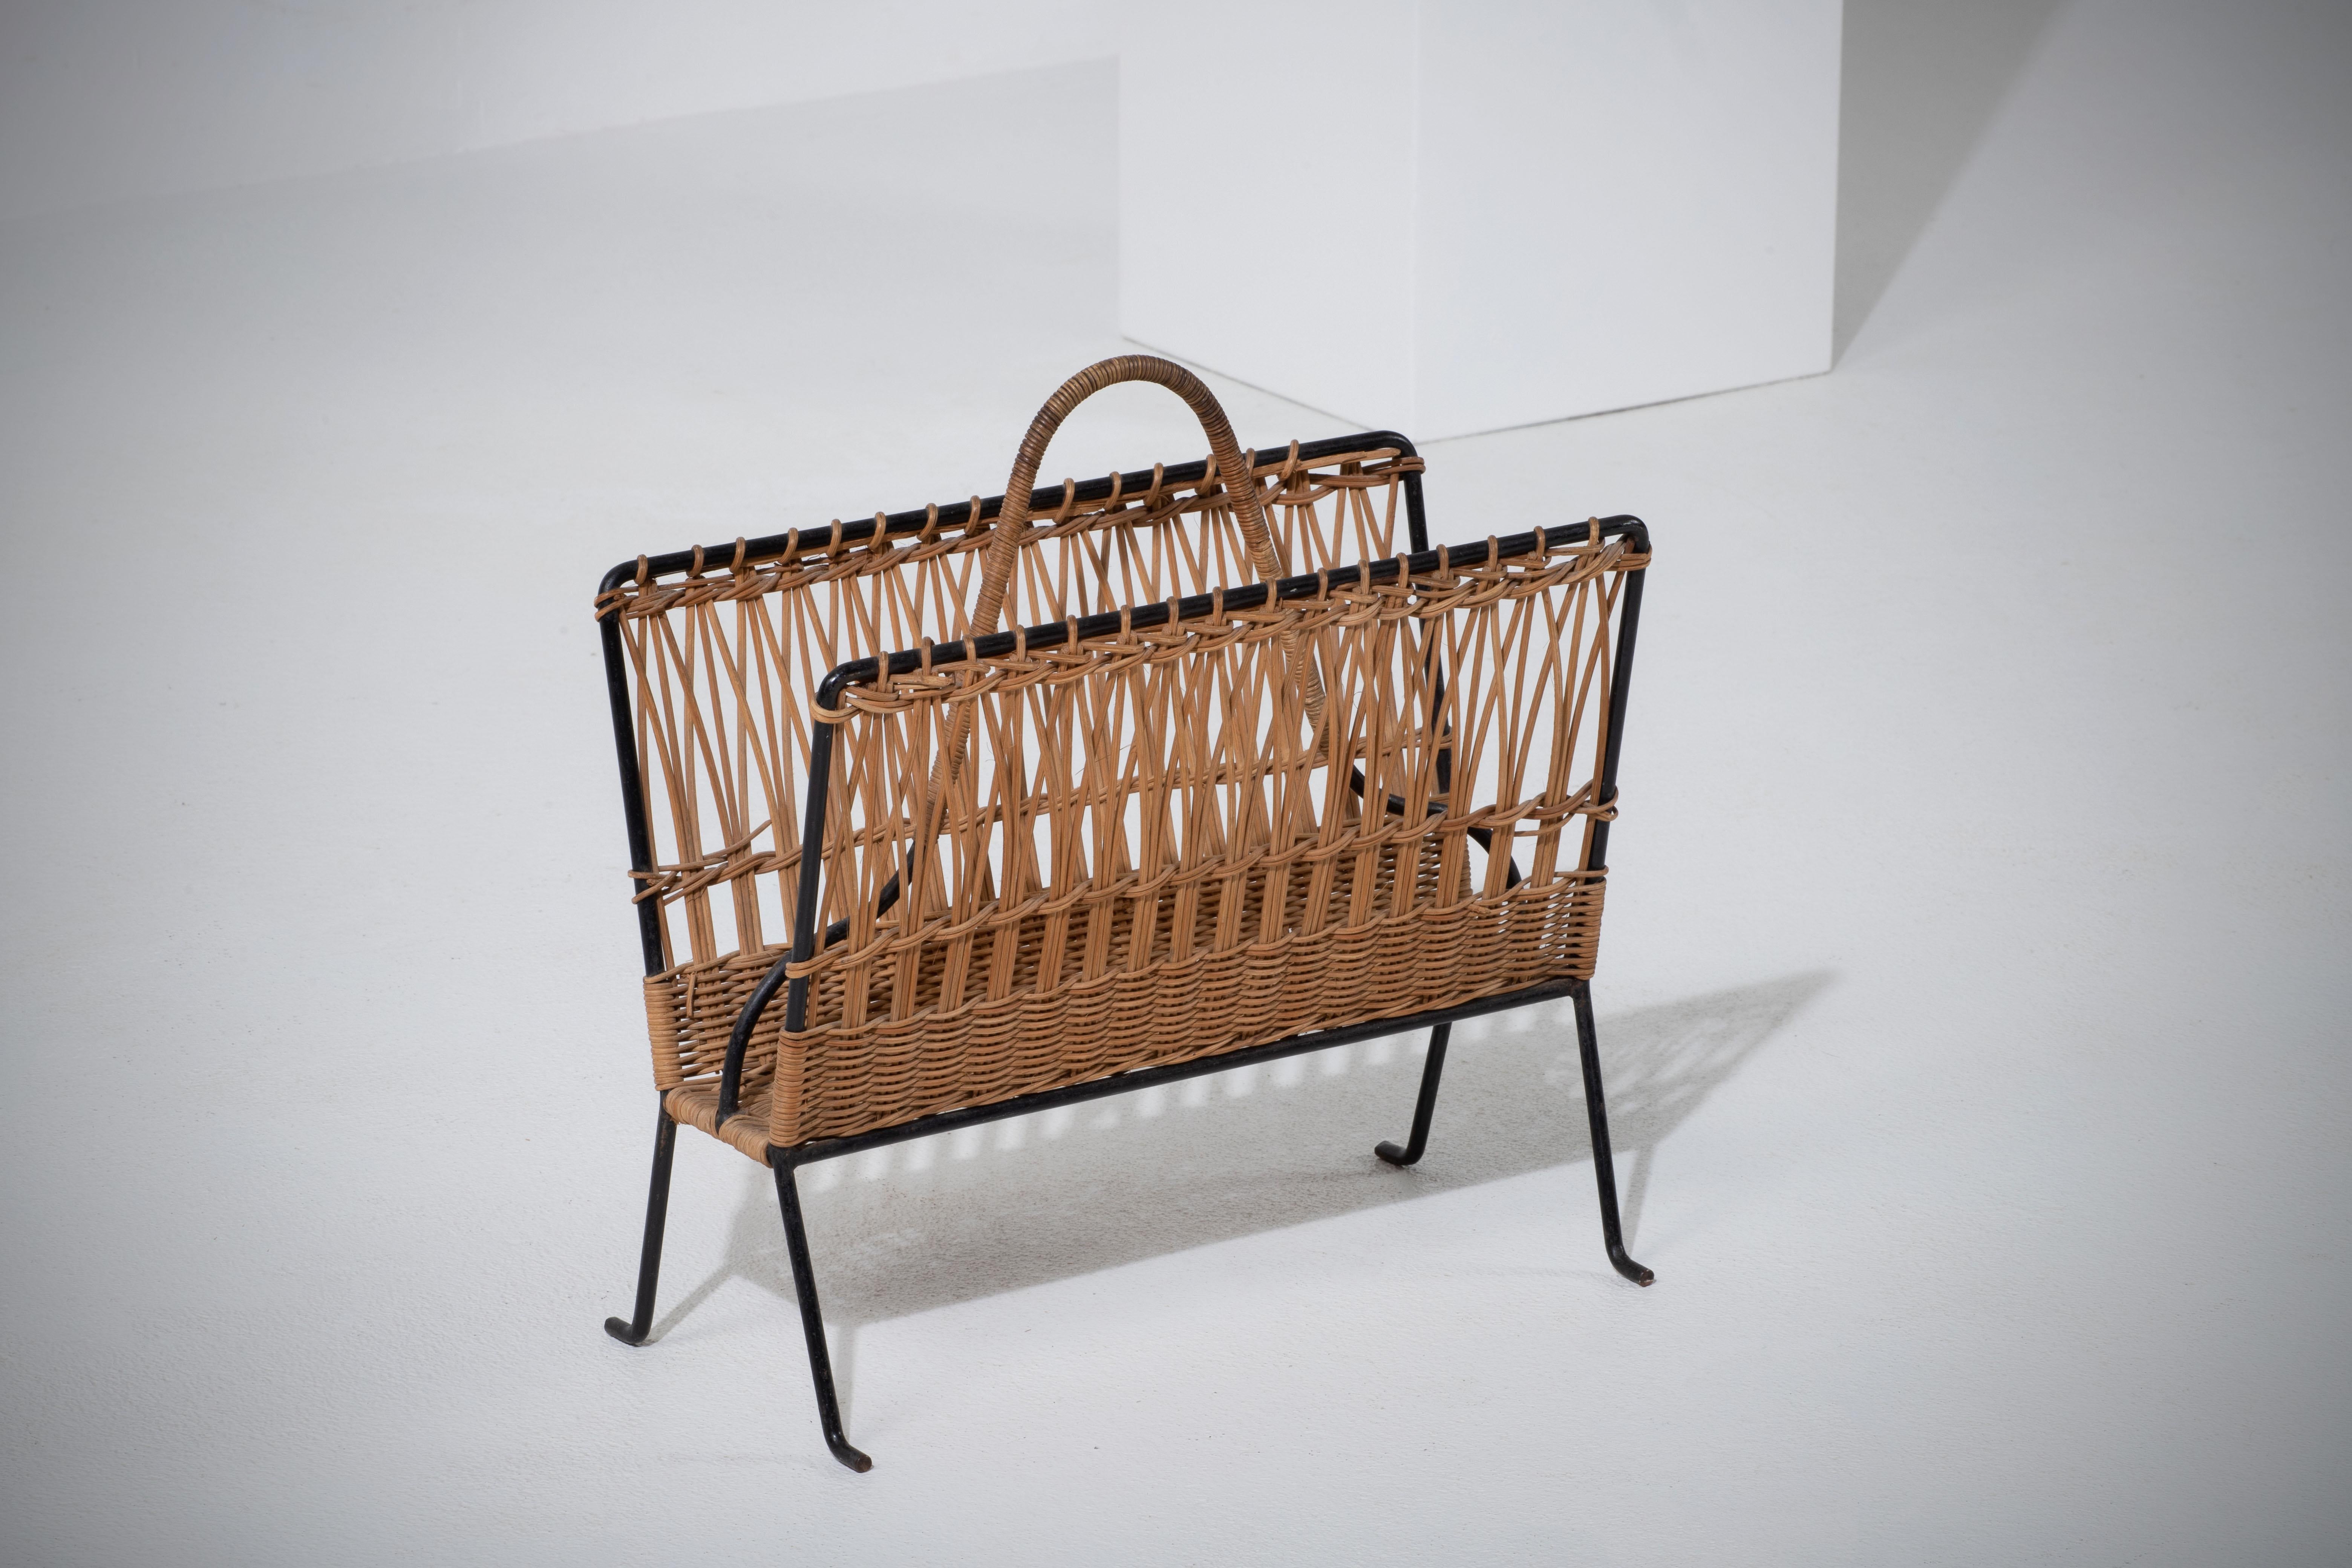 French Provincial Jacques Adnet Wicker Magazine Rack with Black Iron Frame, Brass Ball Feet, 1950s For Sale